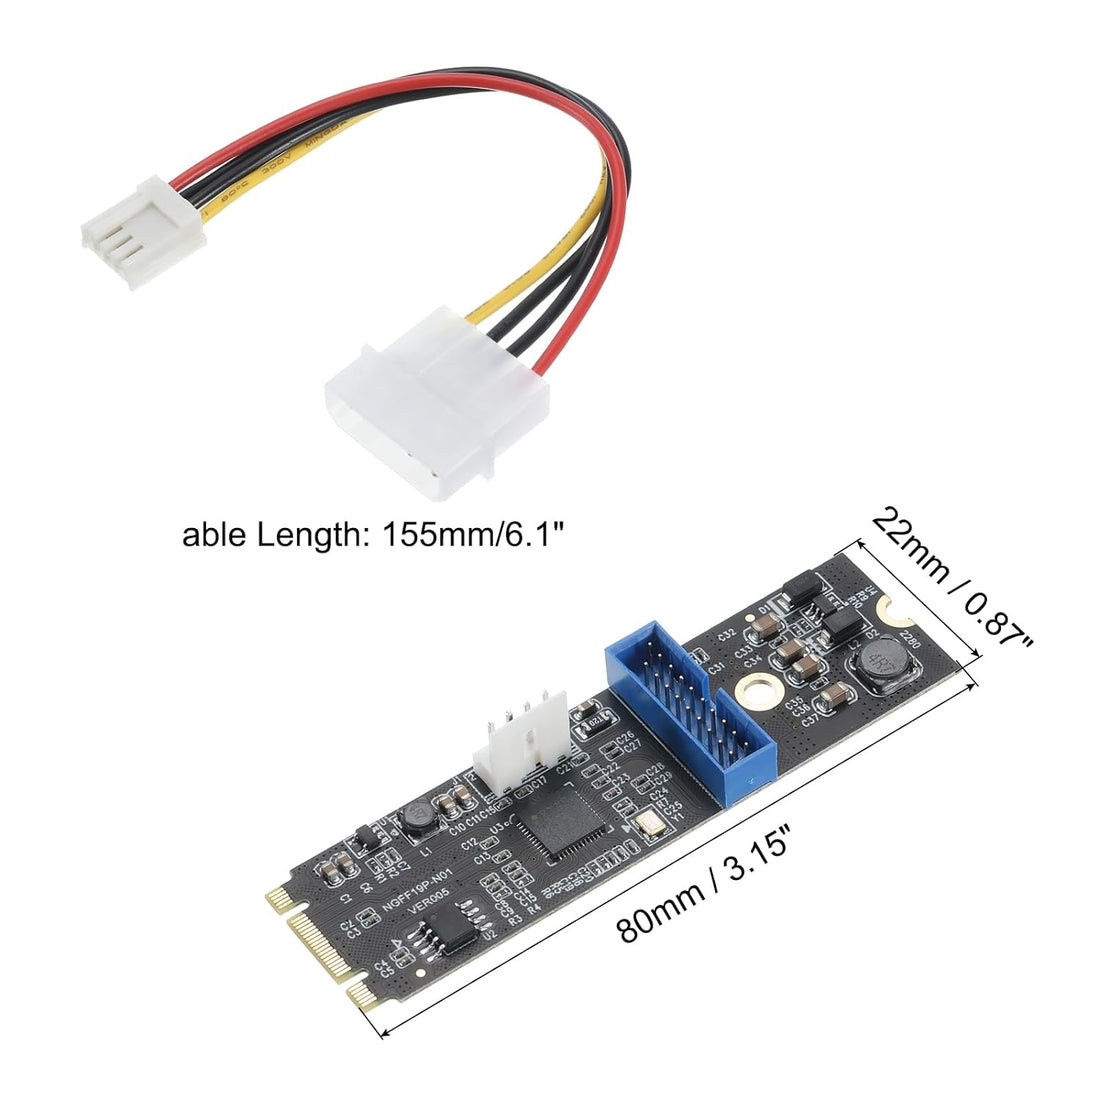 MECCANIXITY M.2 PCI-E to USB3.0 19Pin Front Panel Socket Adapter Board Express Card for Desktop, PC, Office Computer